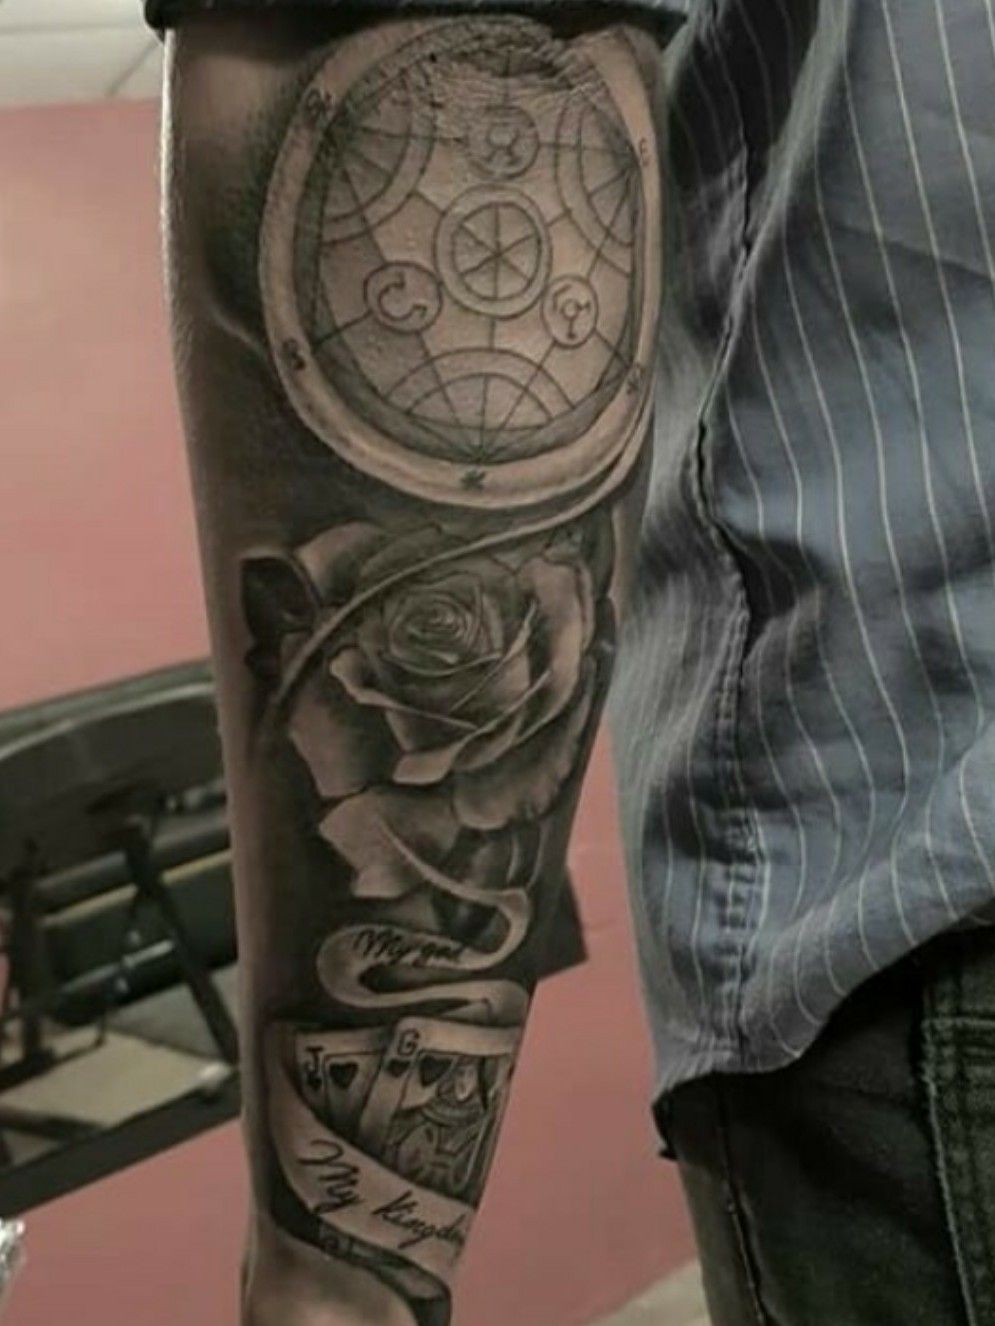 Top 63 Best Fullmetal Alchemist Tattoo Ideas  2021 Inspiration Guide   Anime tattoos Tattoos for guys Tattoo quotes for men